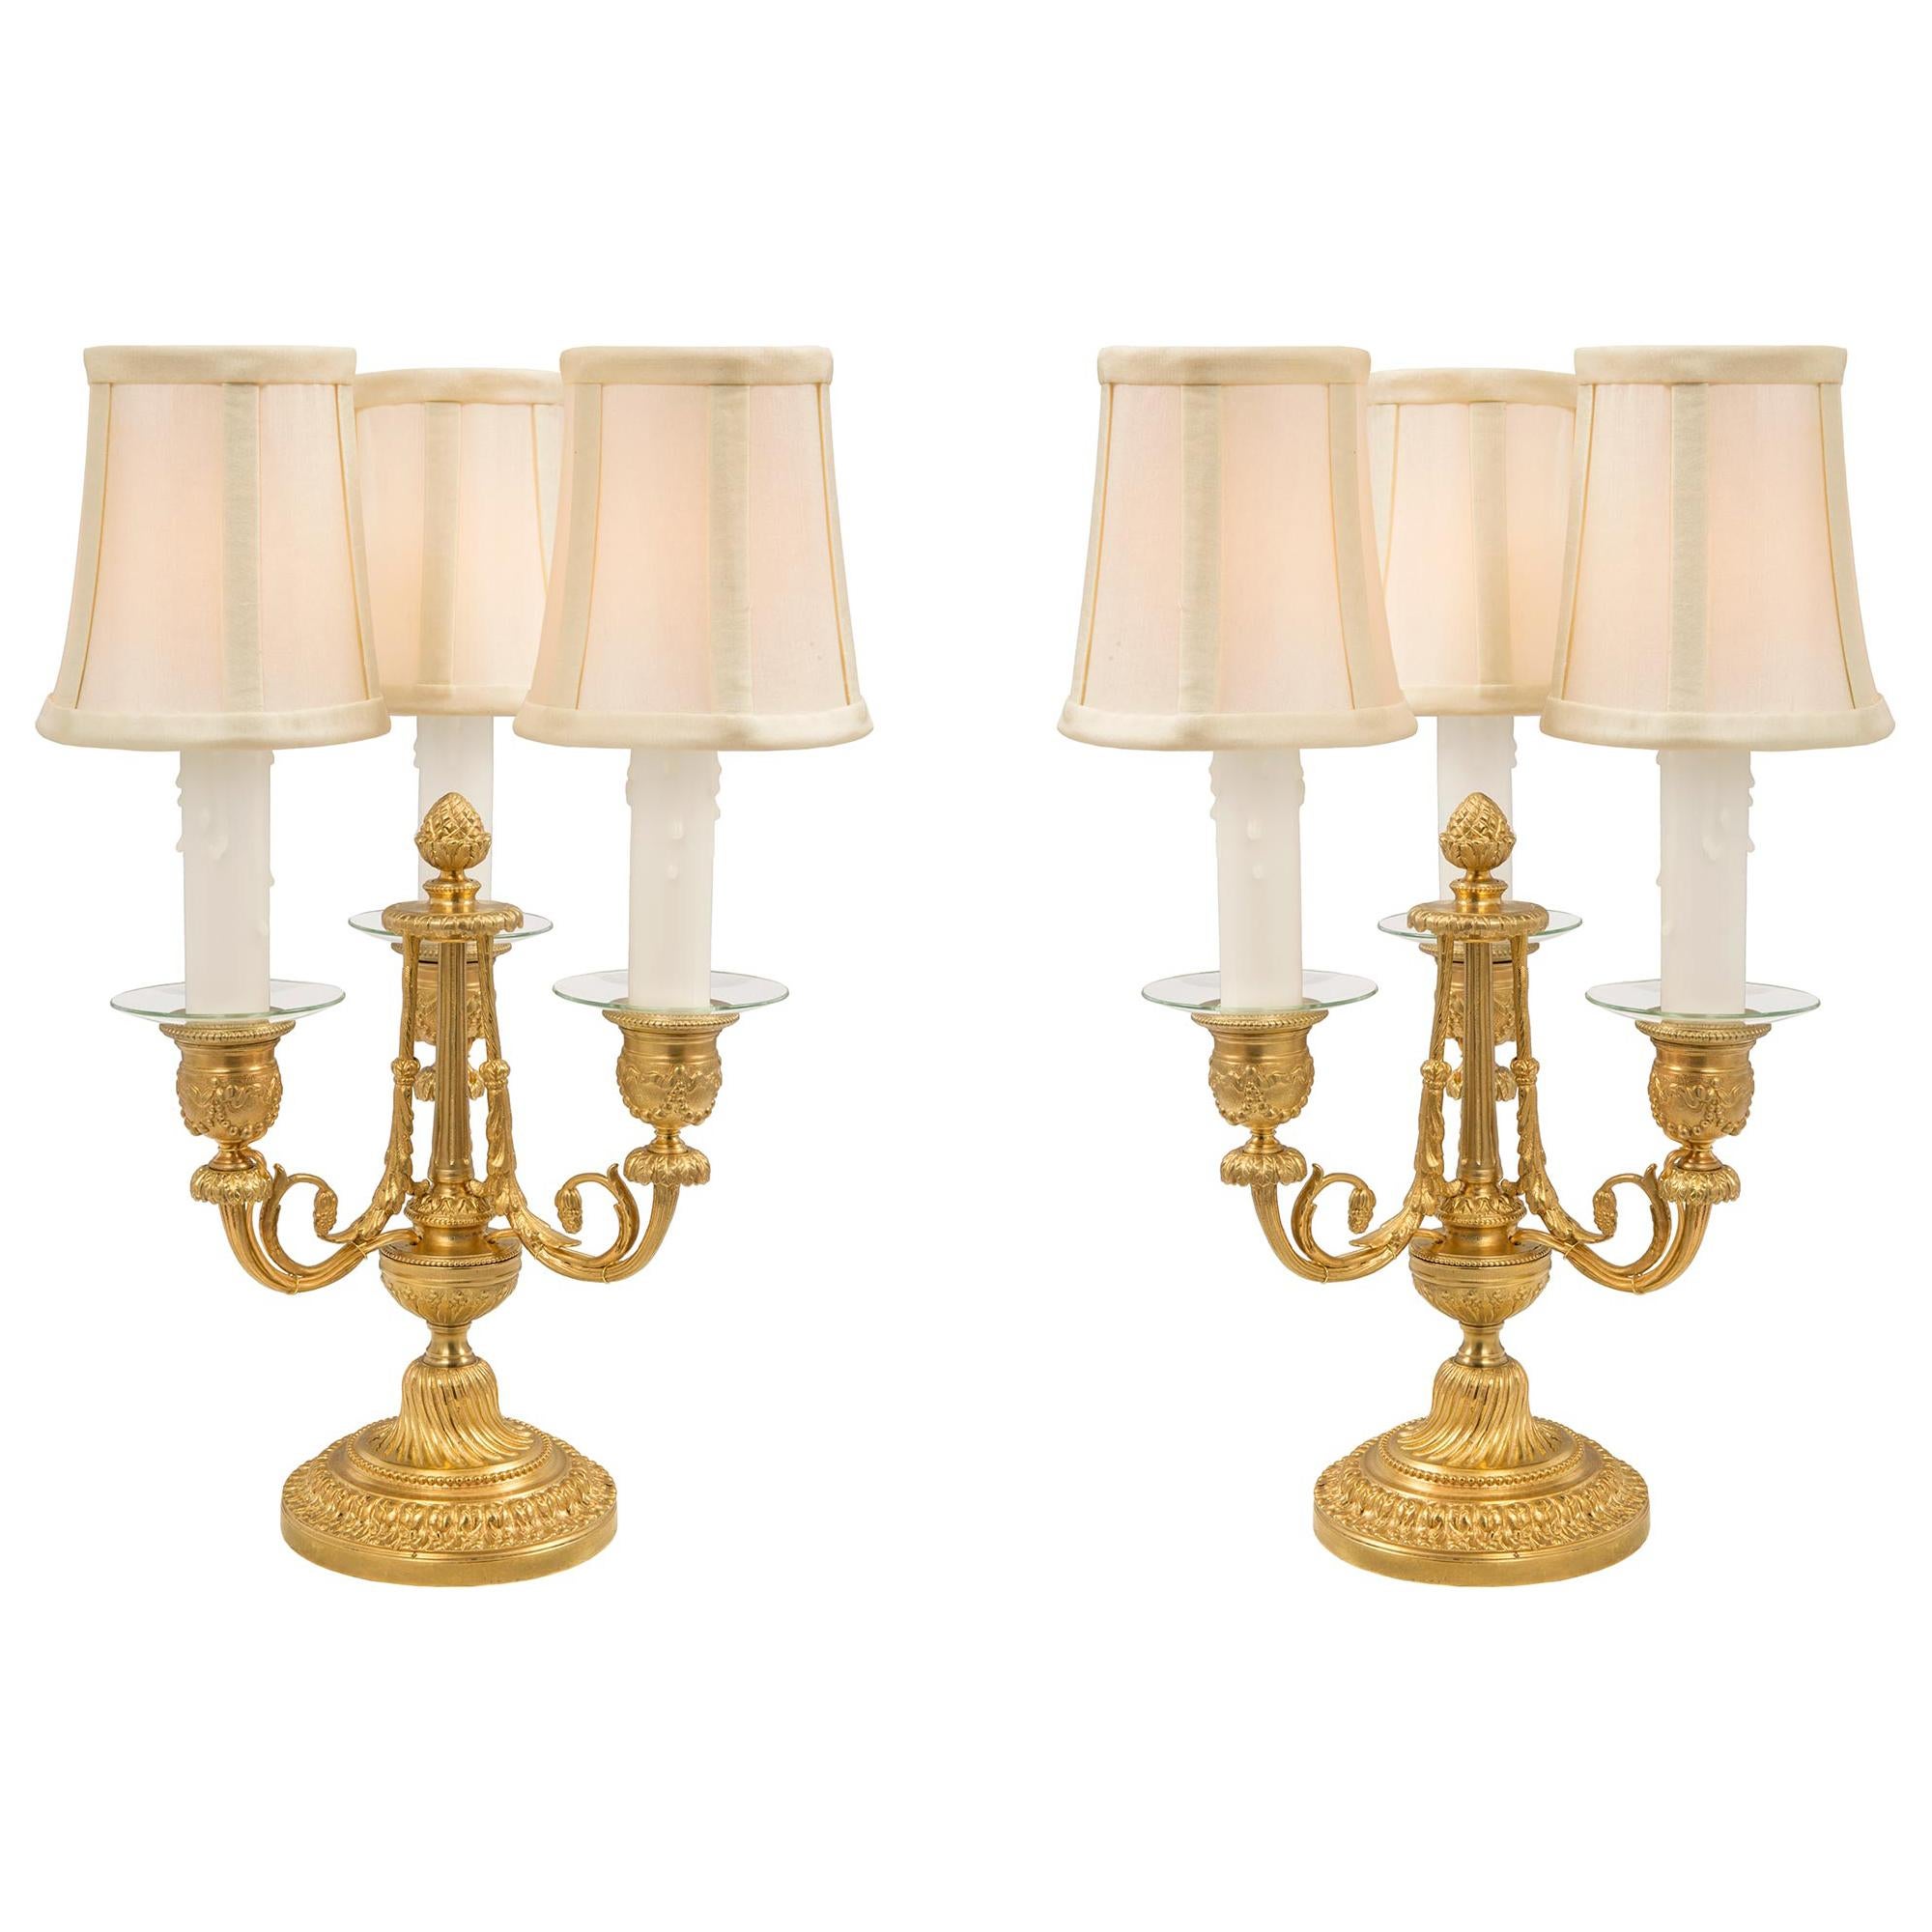 Pair of French 19th Century Louis XVI St. Ormolu Three Arm Candelabra Lamps For Sale